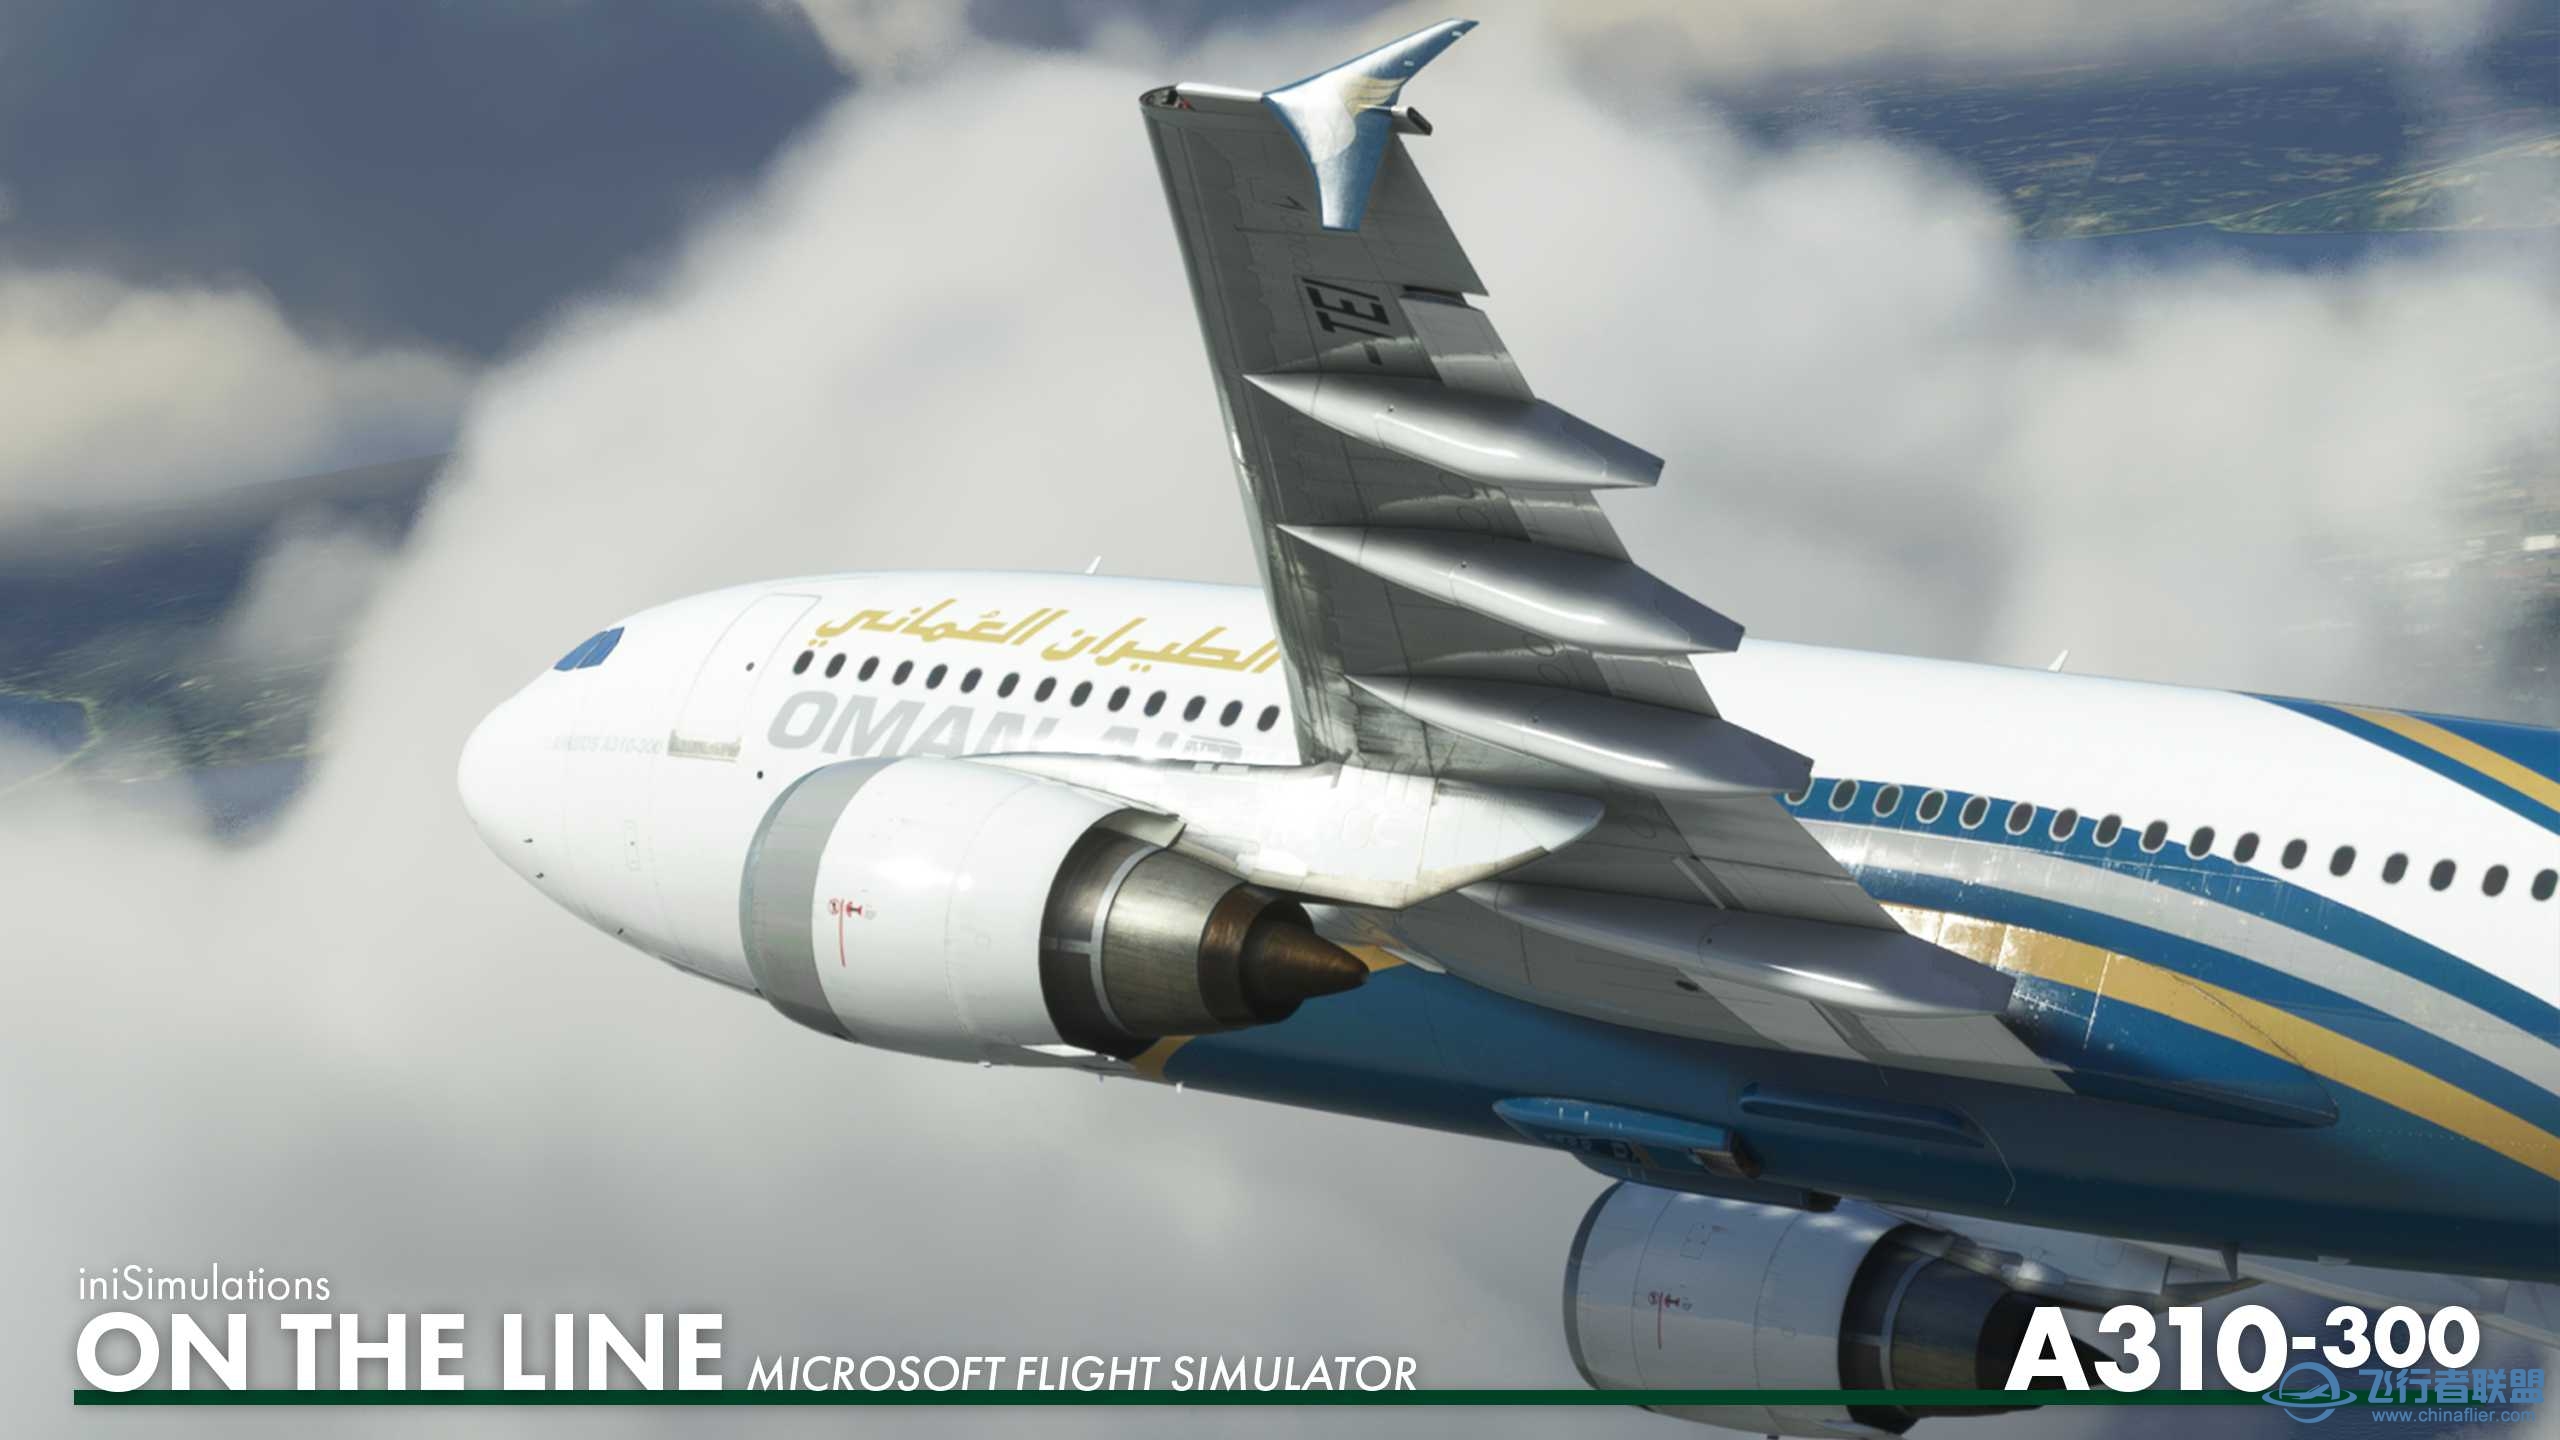 iniSimulations A310-300 will be coming to Microsoft Flight Simulator.-2433 